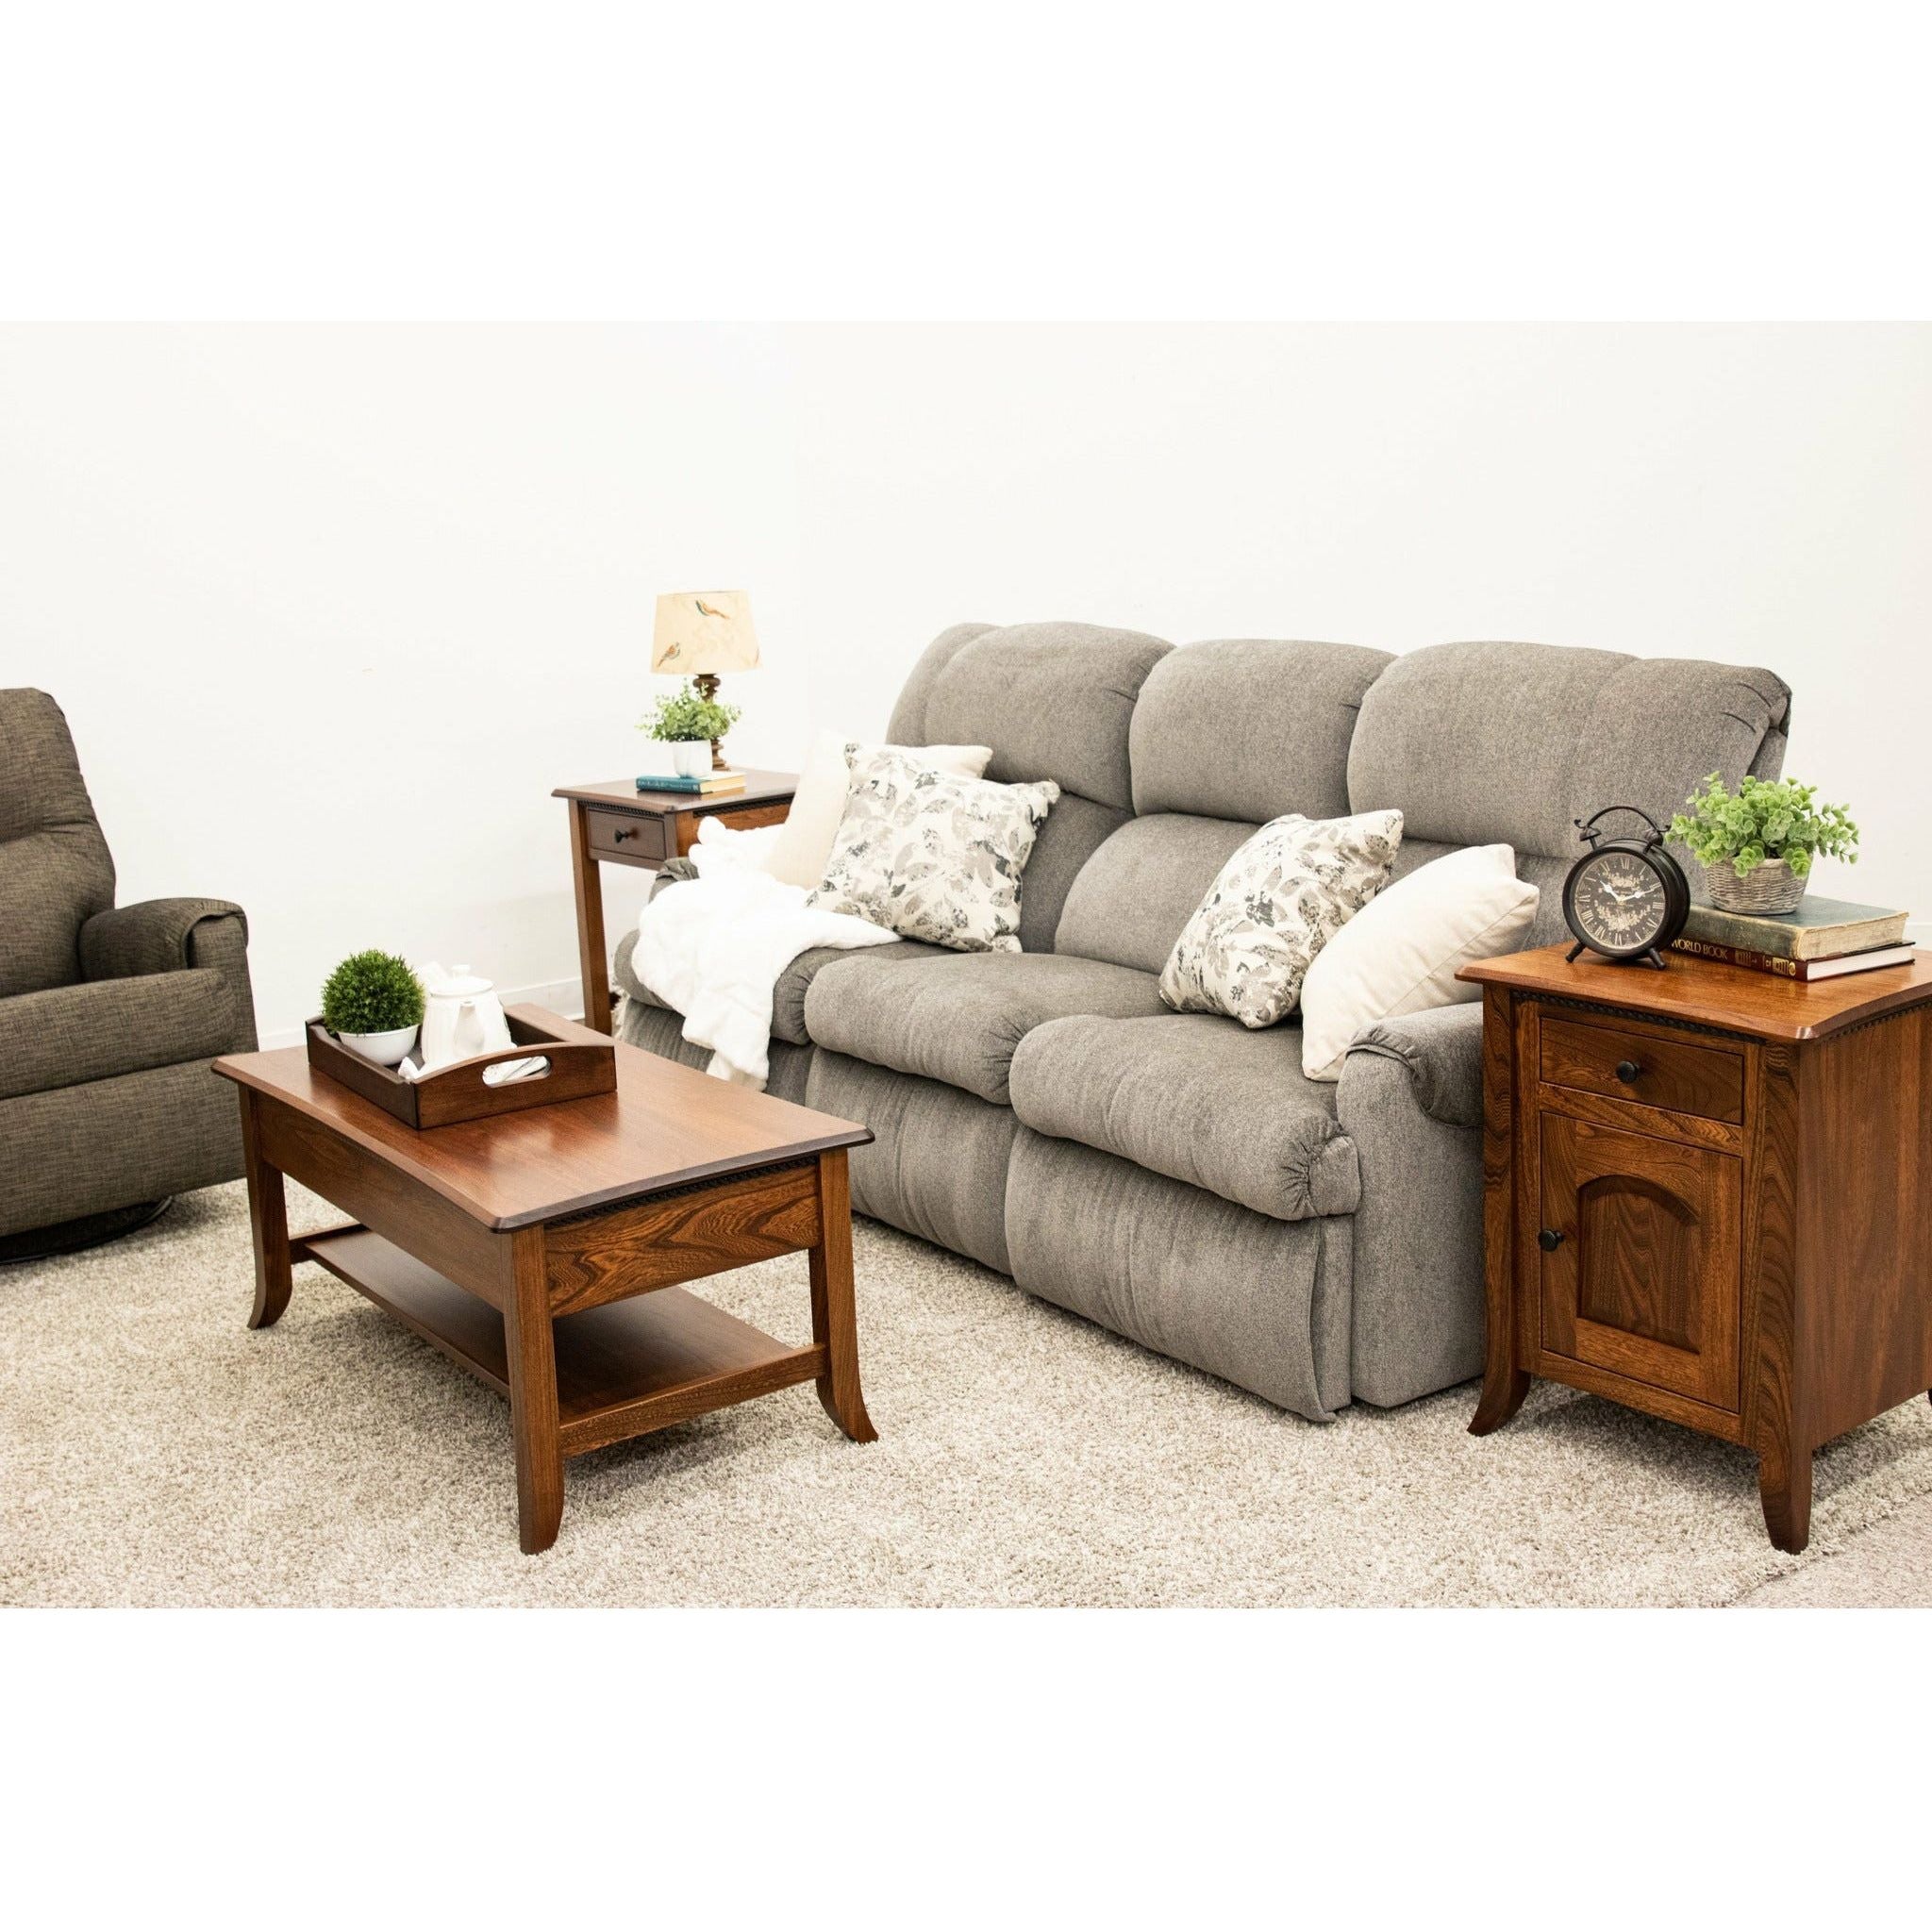 Plymouth Rectangle Open Coffee Table